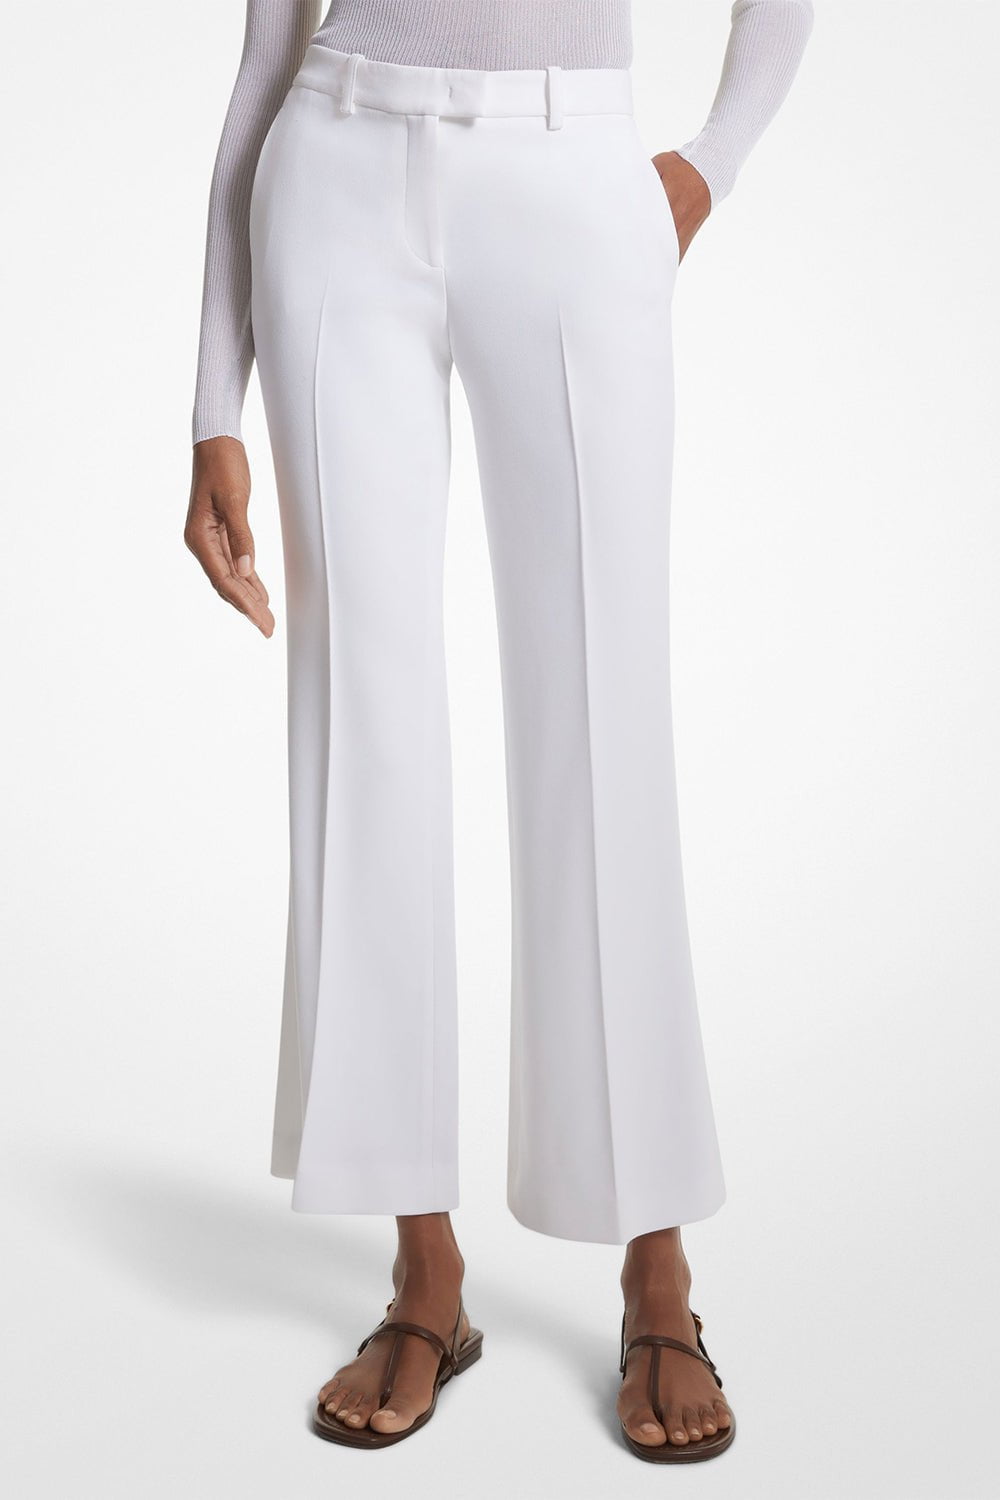 Haylee Trouser - Optic White CLOTHINGPANTCROPPED MICHAEL KORS COLLECTION   